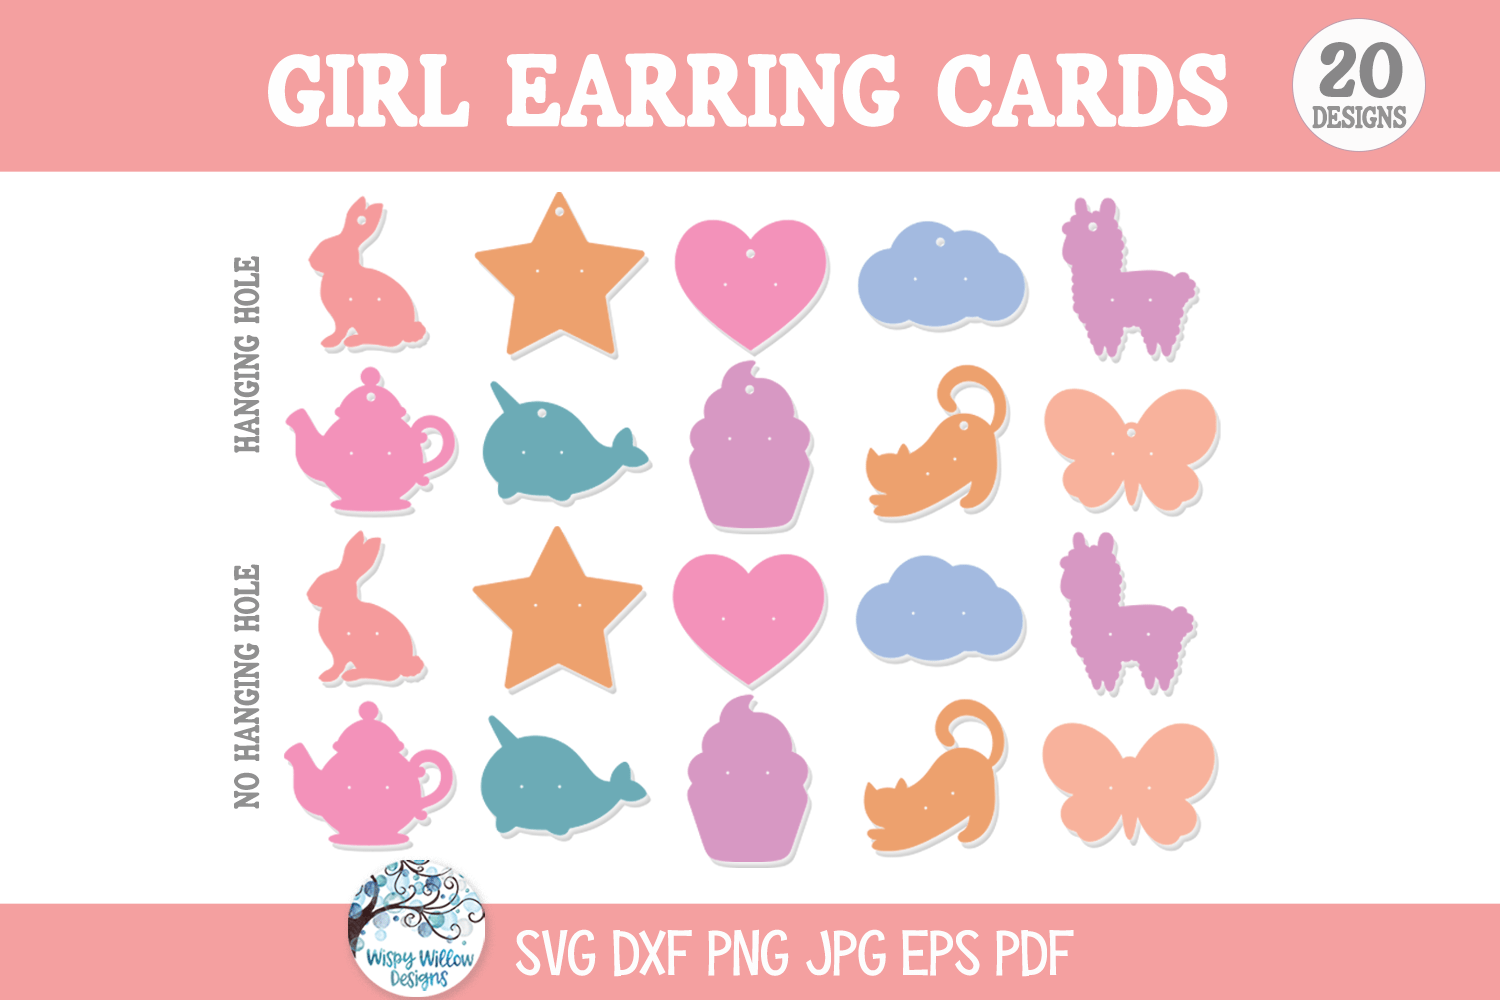 Girl Earring Cards SVG Bundle | Cute Jewelry Display Card Template Wispy Willow Designs Company